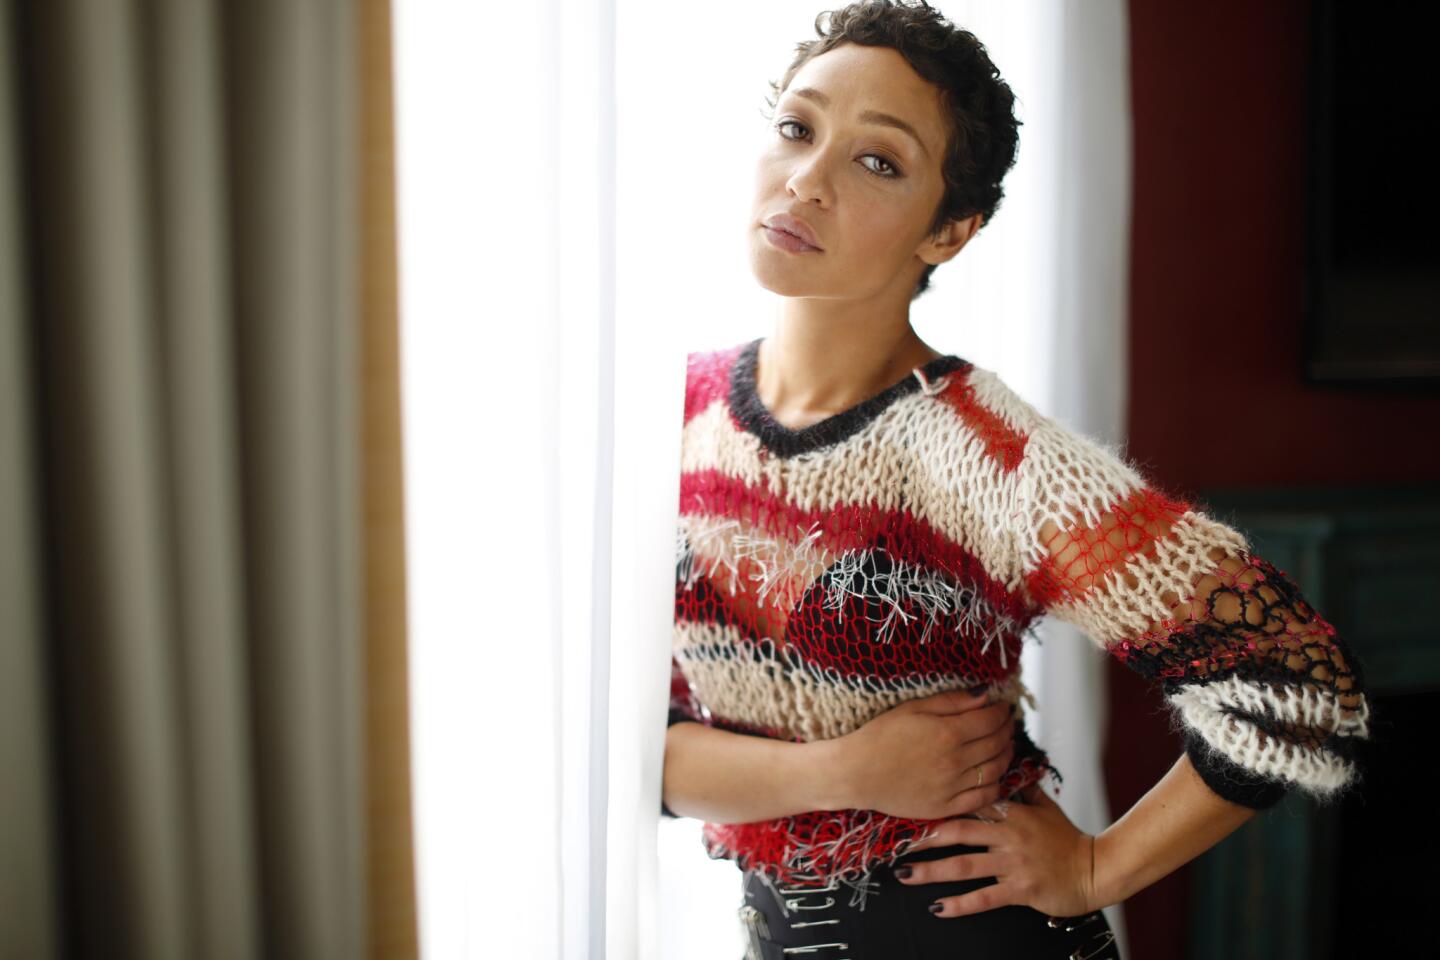 Celebrity portraits by The Times | Ruth Negga